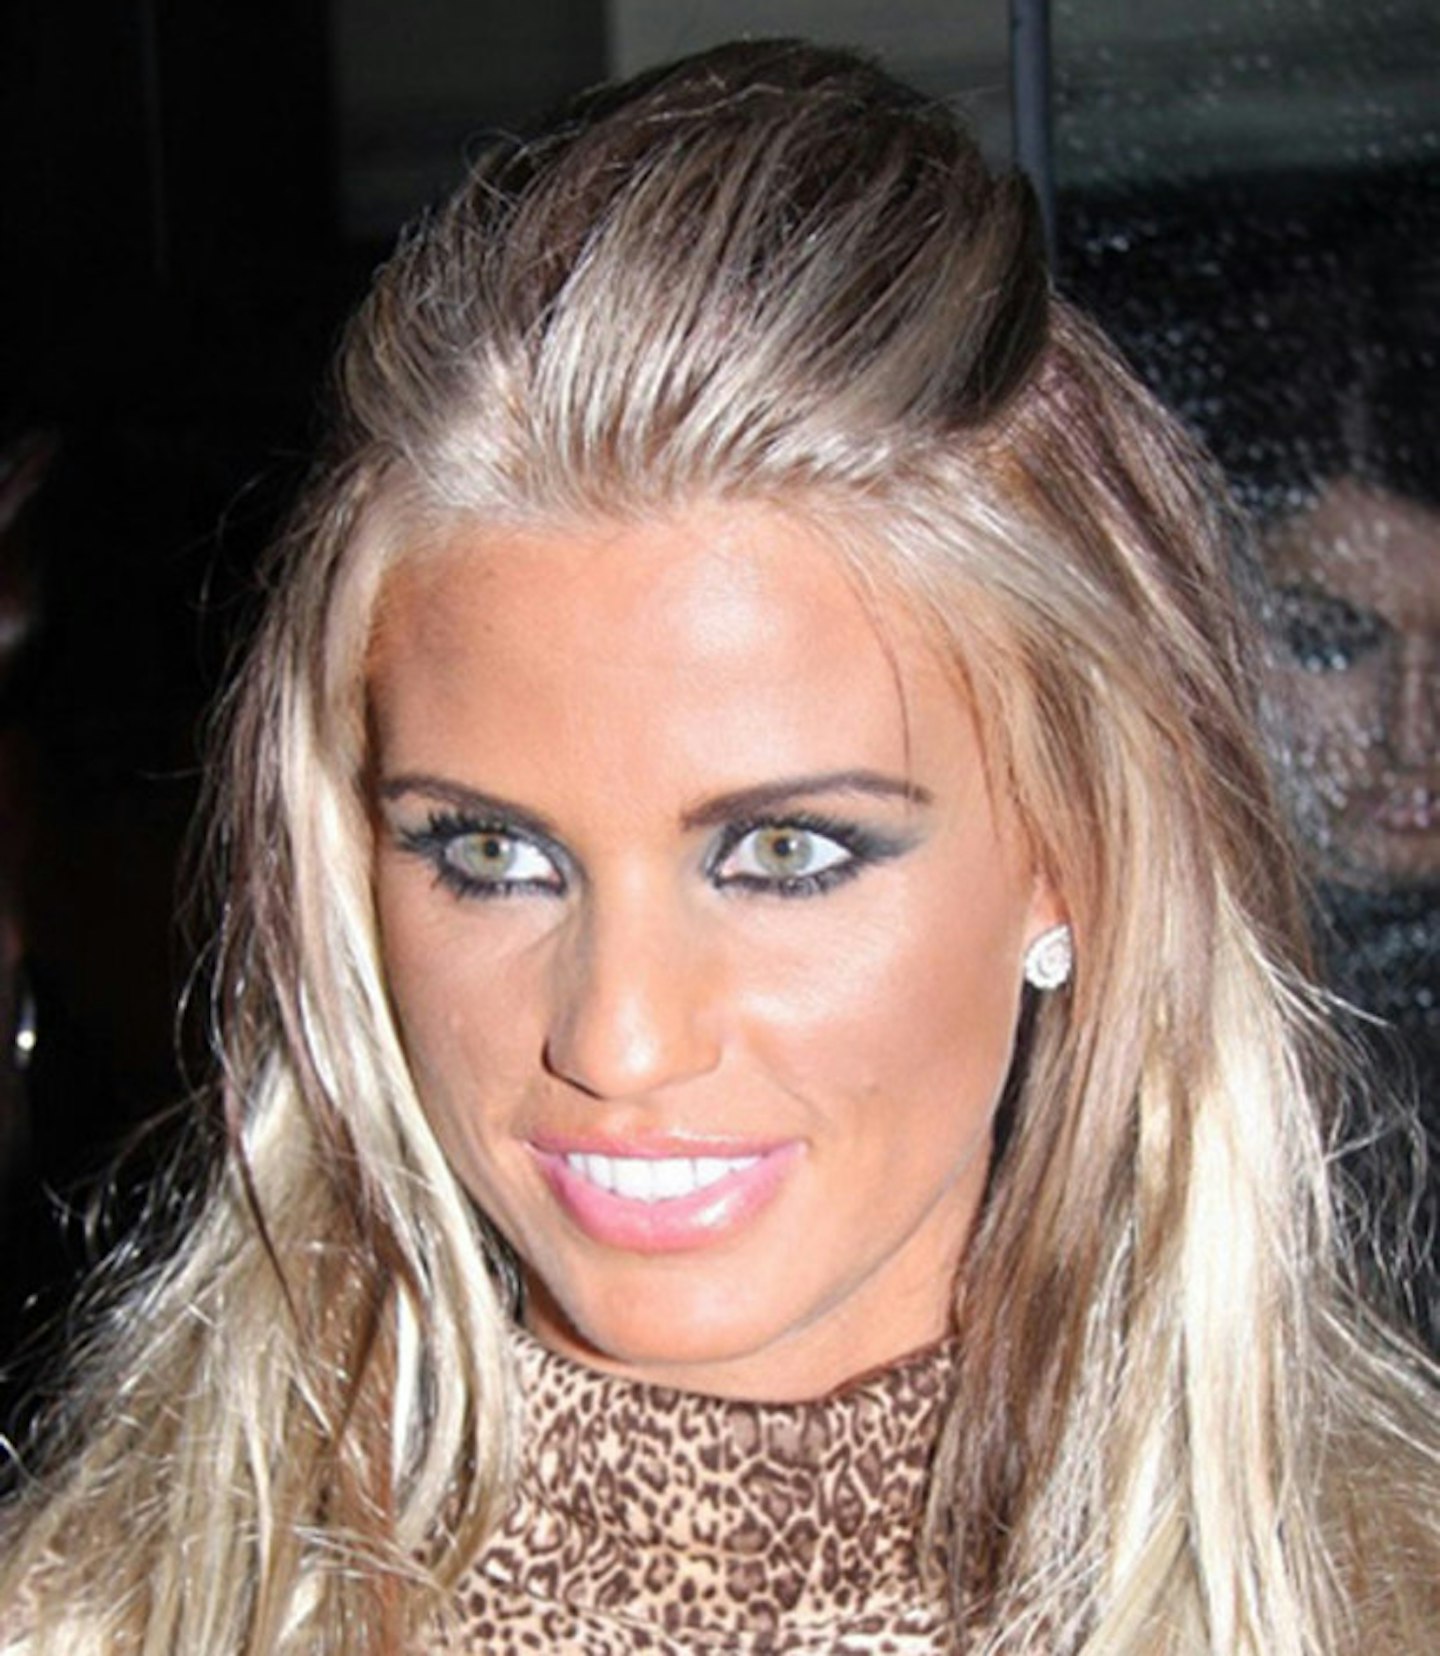 katie-price-jordan-cosmetic-plastic-surgery-before-and-after-36